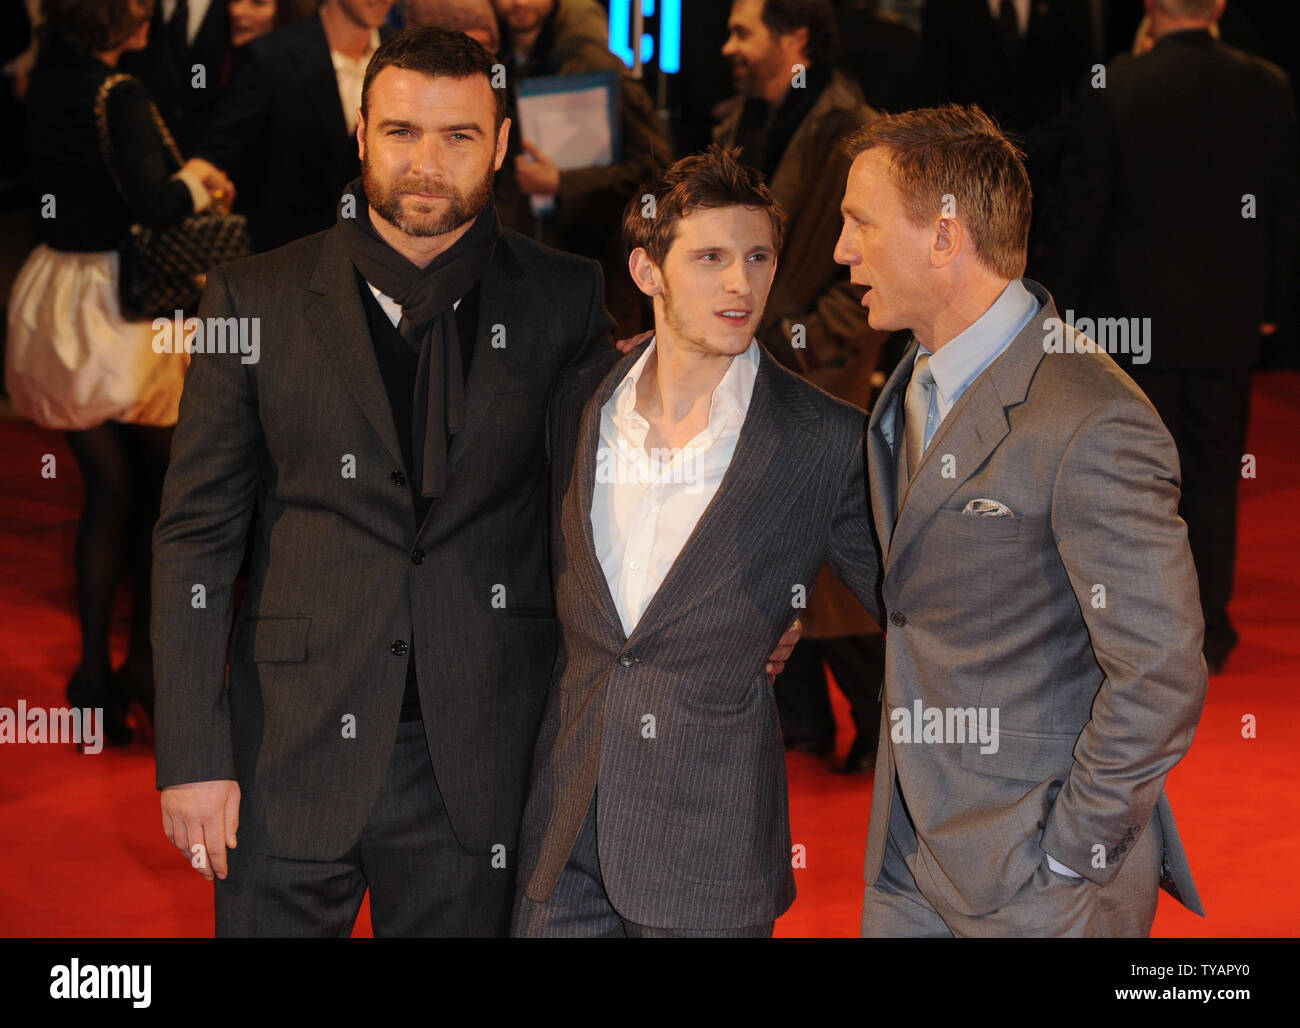 American actor Liev Schreiber and British actors Jamie Bell and Daniel Craig attend the European premiere of 'Defiance' at Odeon, Leicester Square in London on January 6, 2009.  (UPI Photo/Rune Hellestad) Stock Photo